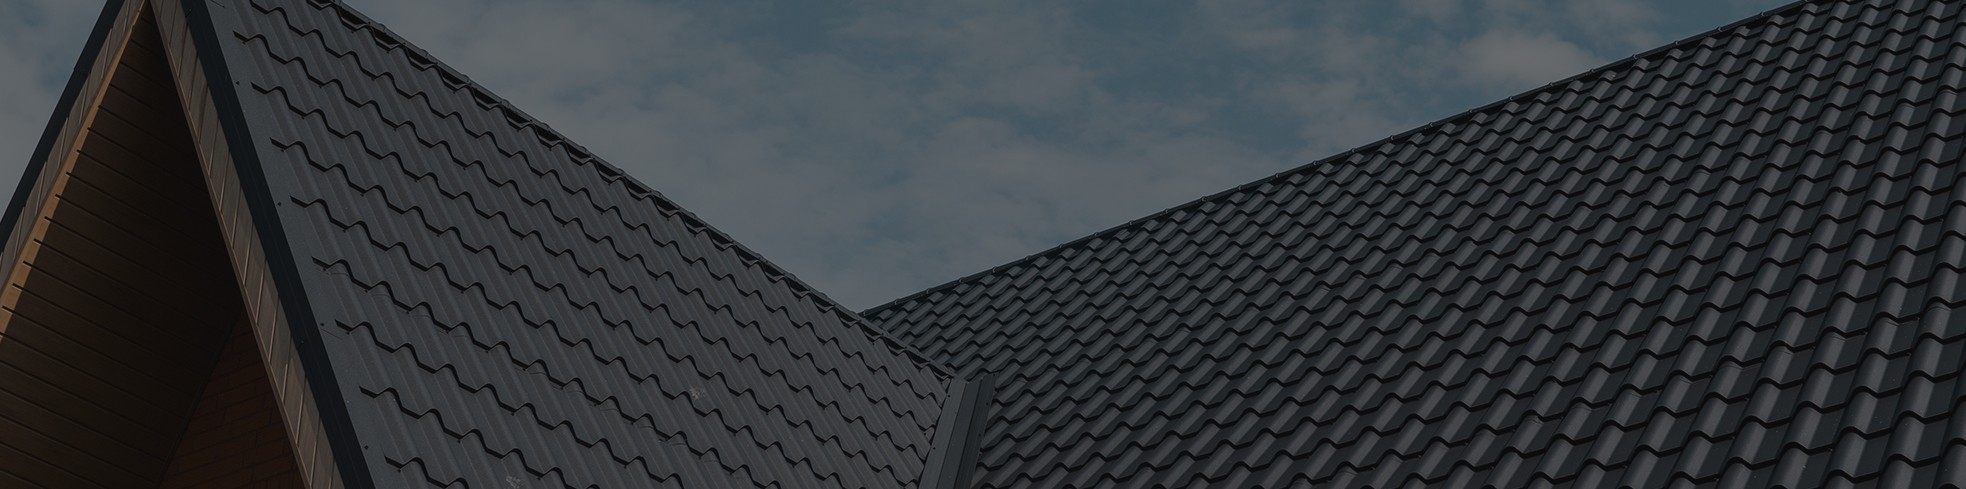 Garage roofing construction & repair services in Milwaukee, WI 